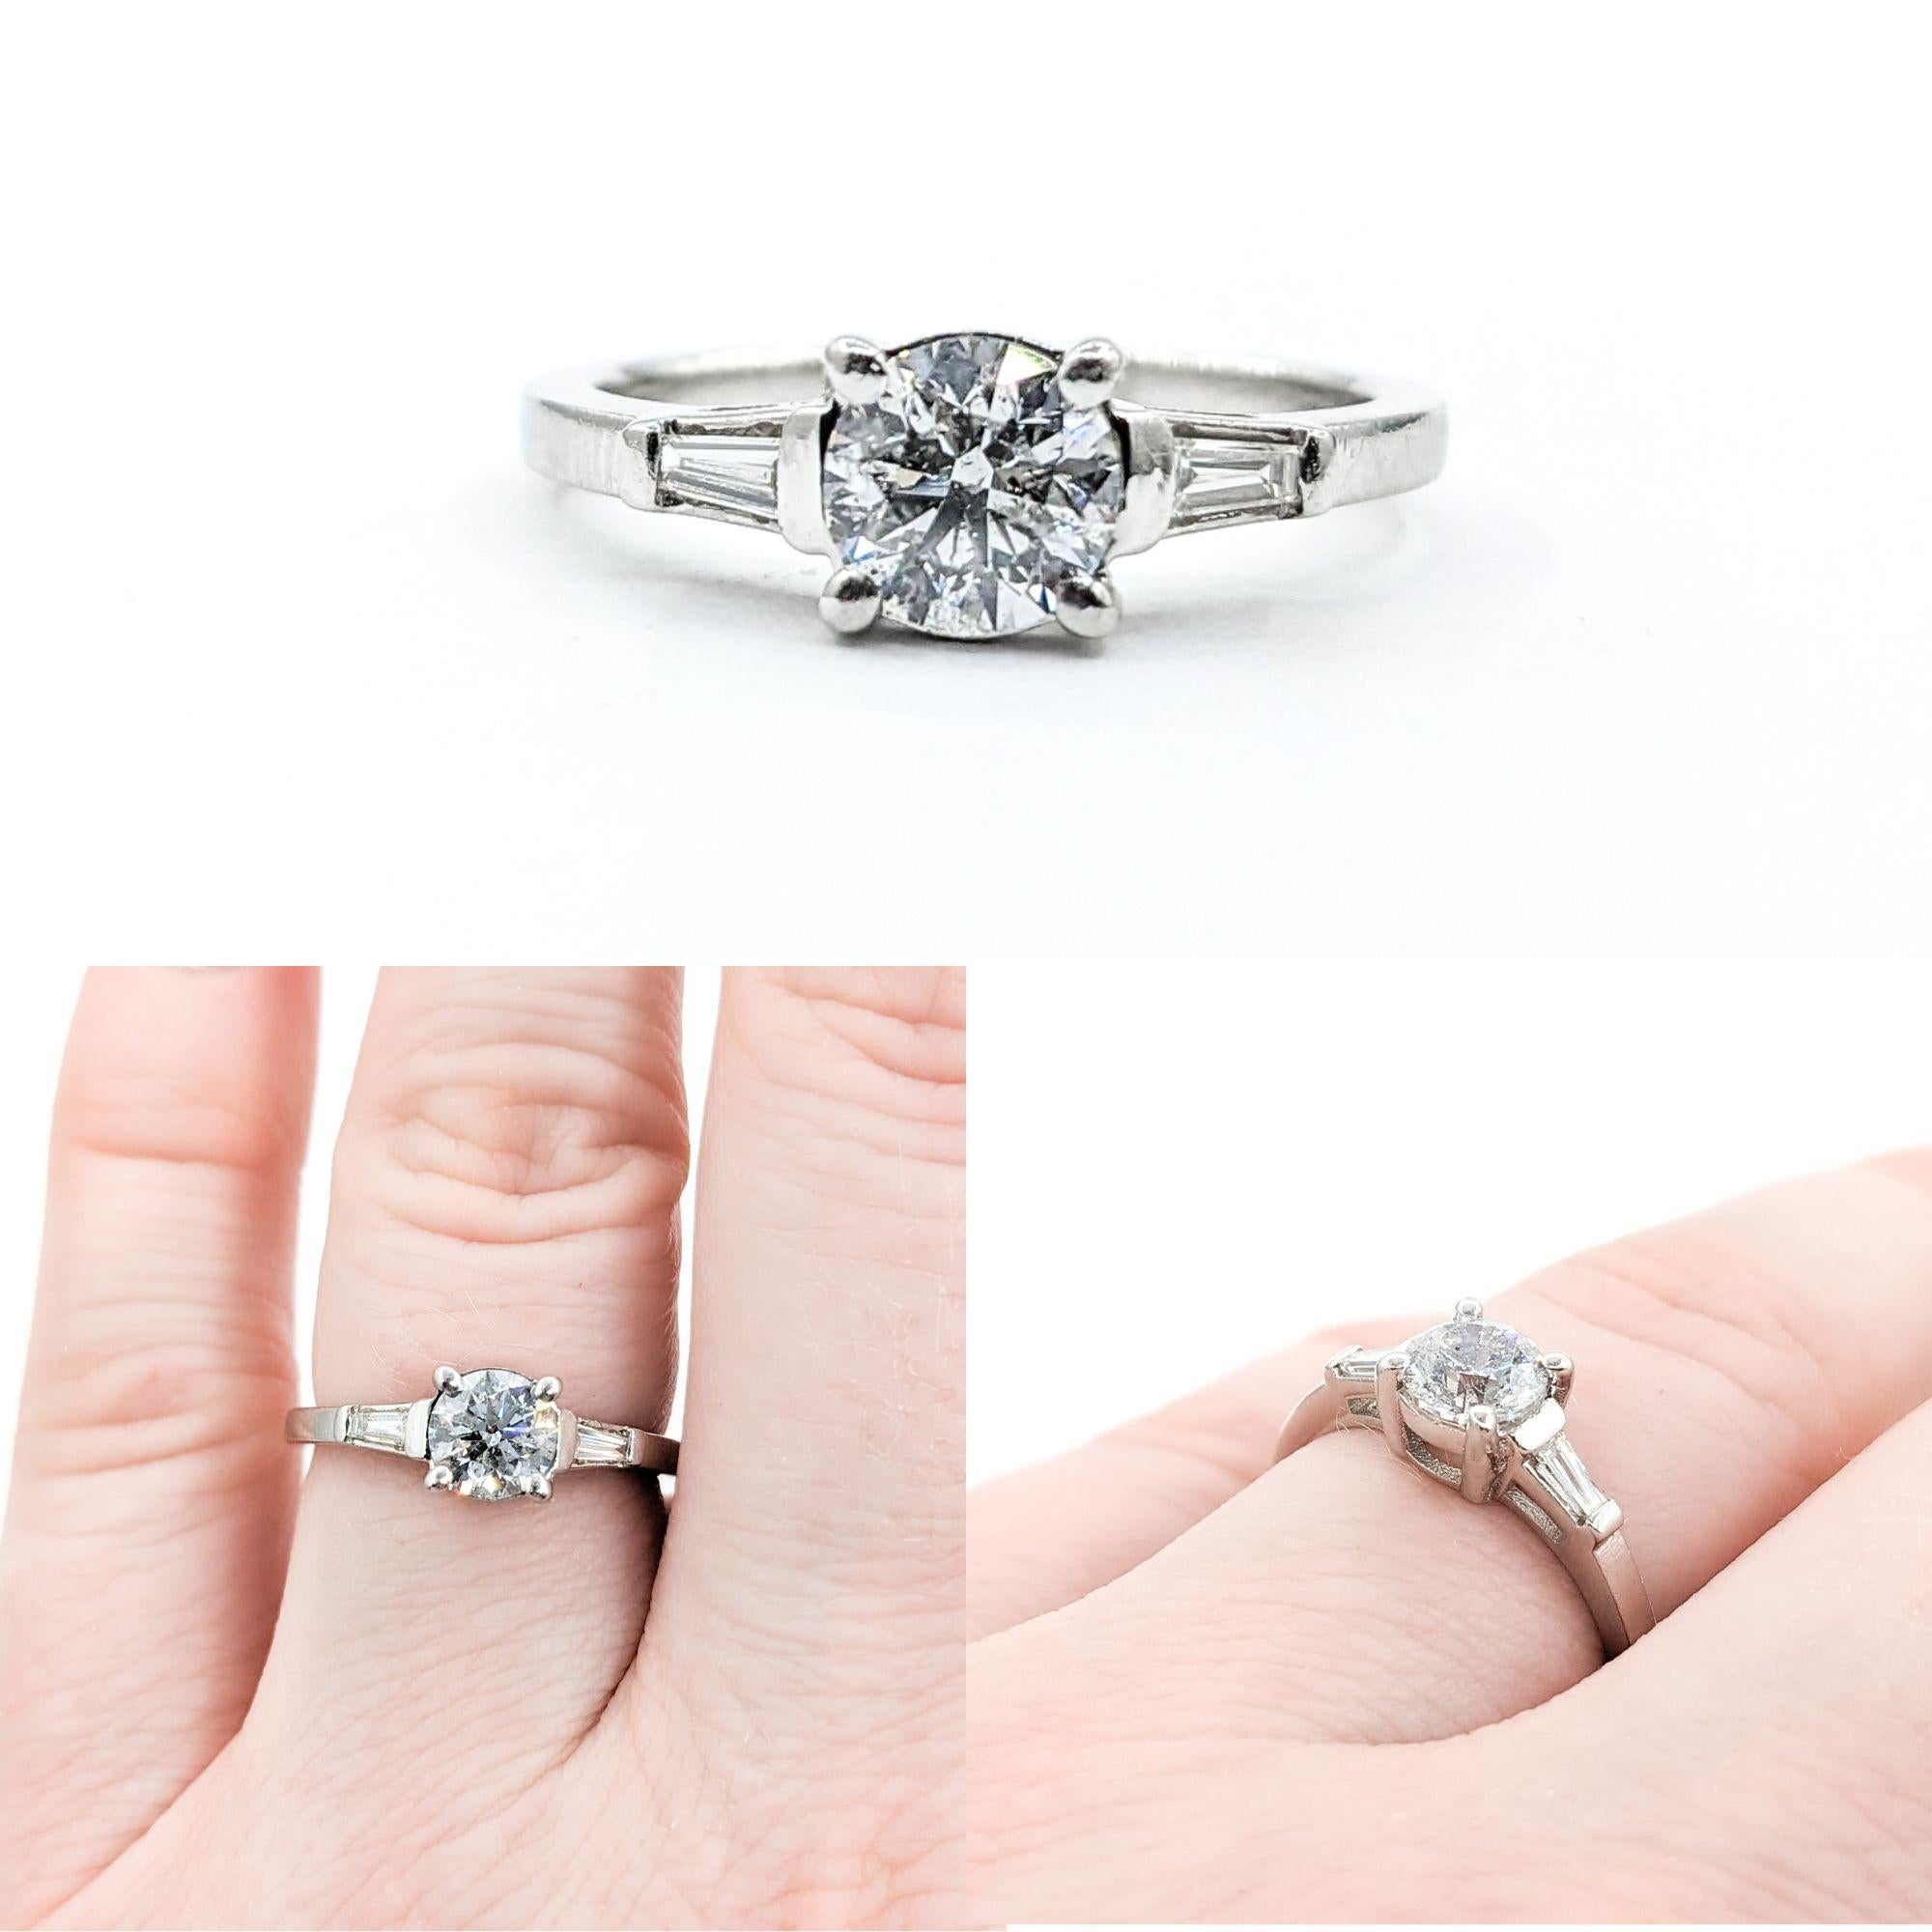 vintage 3-stone design Diamond Engagement Ring In Platinum

Introducing an exquisite Diamond Engagement Ring, expertly crafted in 950pt Platinum. This elegant ring showcases .94ctw of diamonds in a vintage 3-stone design, a timeless symbol of your